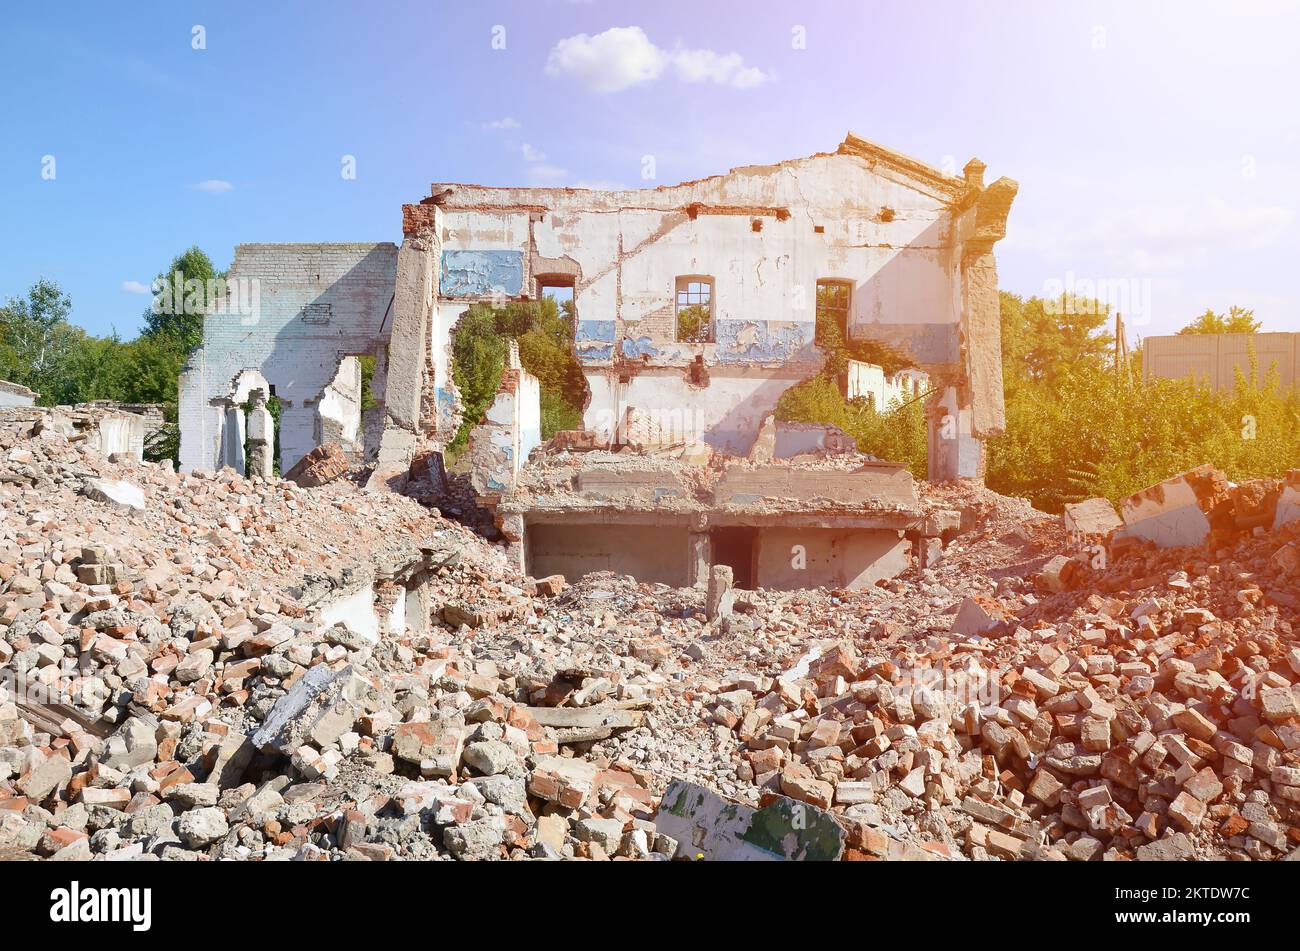 Collapsed industrial multistorey building in daytime. Disaster scene full of debris, broken bricks and damaged non residental house. Concept of war action aftermath or building demolition Stock Photo